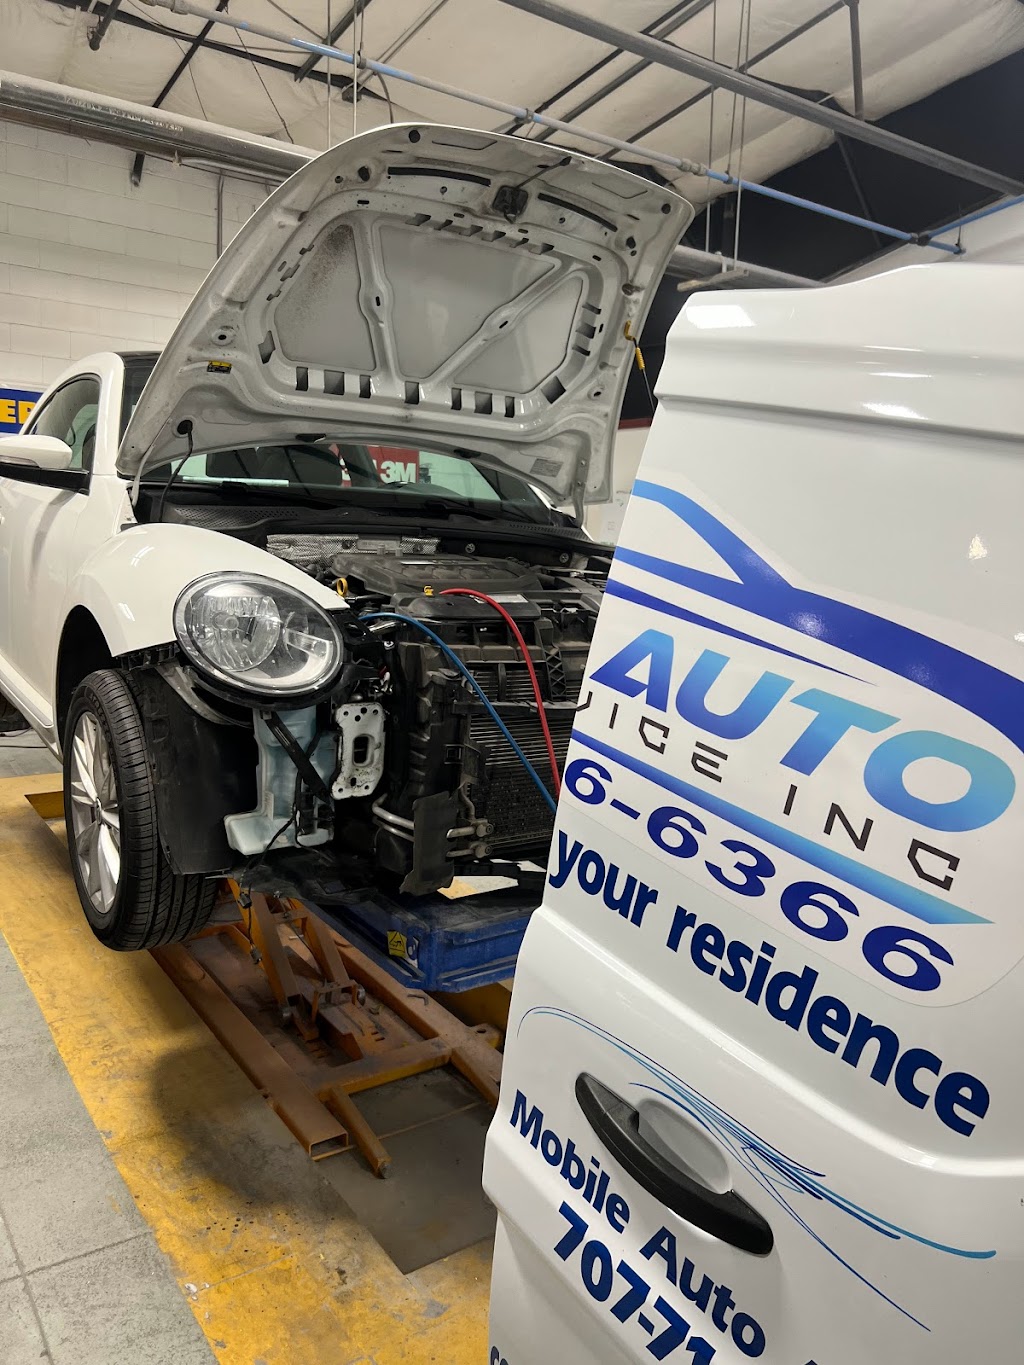 COOL Auto AC Service inc (Mobile Service We Come To You) | 607 Elmira Rd #211, Vacaville, CA 95687 | Phone: (707) 716-6366